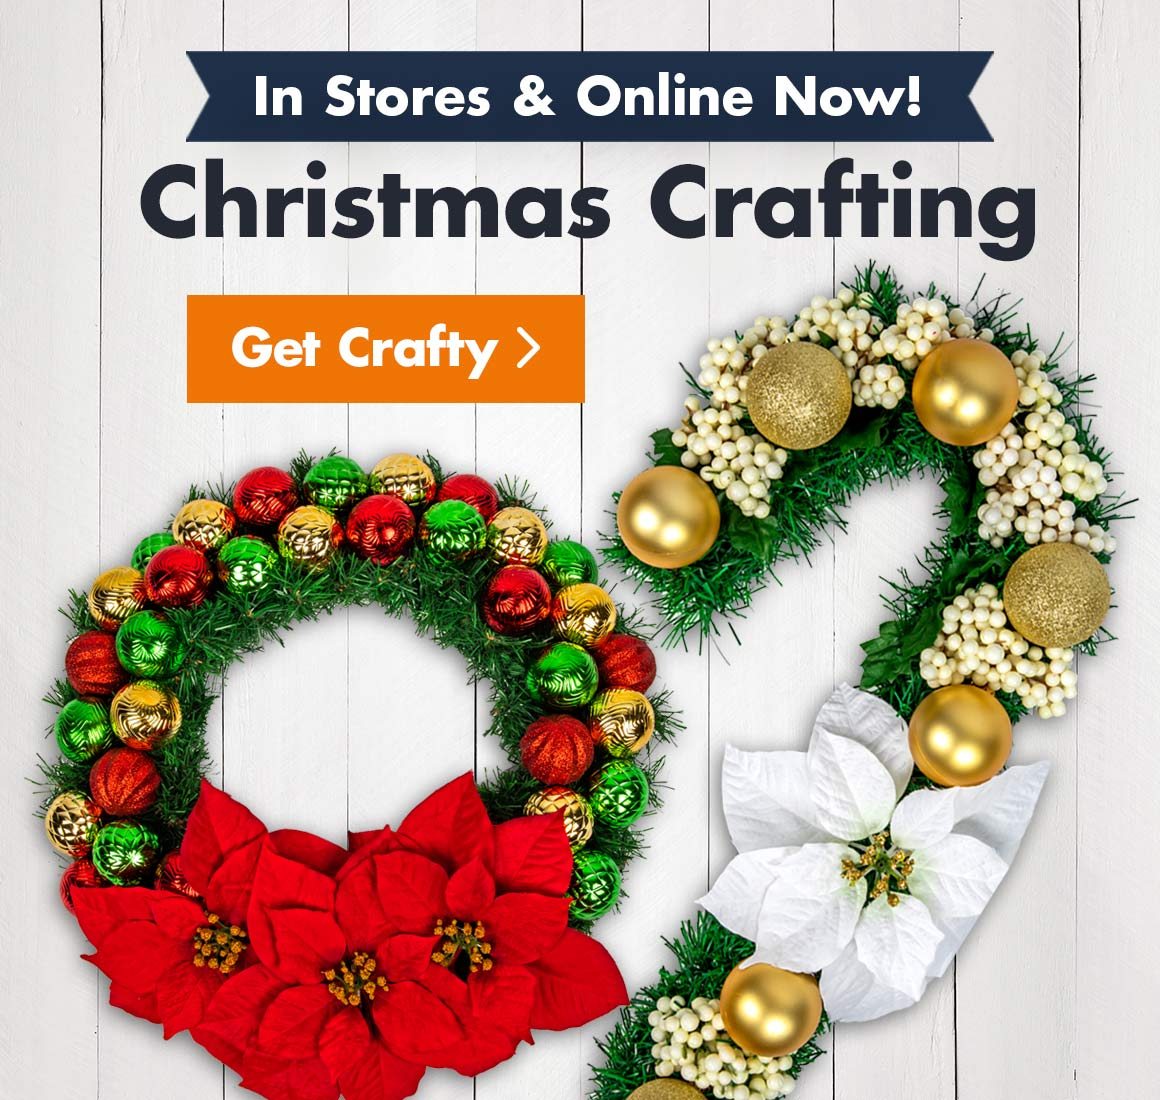 Christmas Crafting is Online Now!